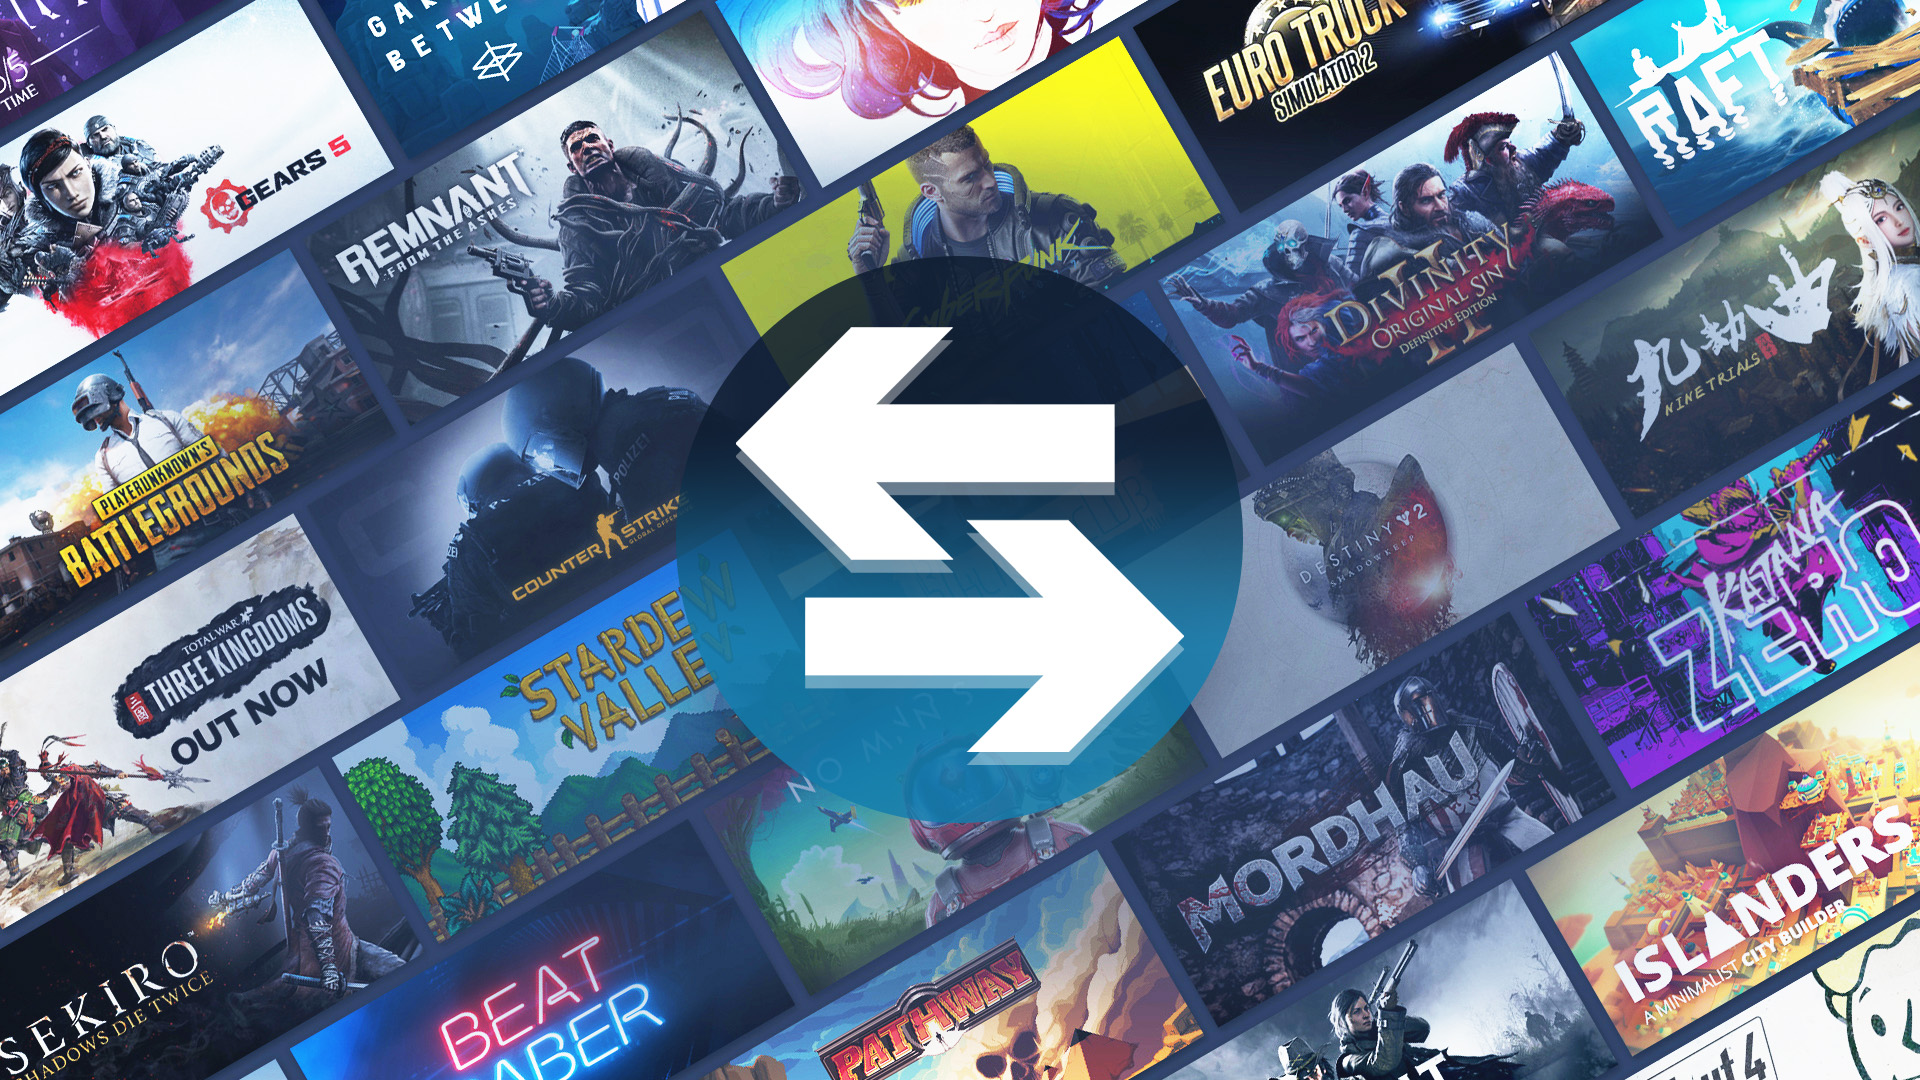 Steam store introduces new image rules for game listings